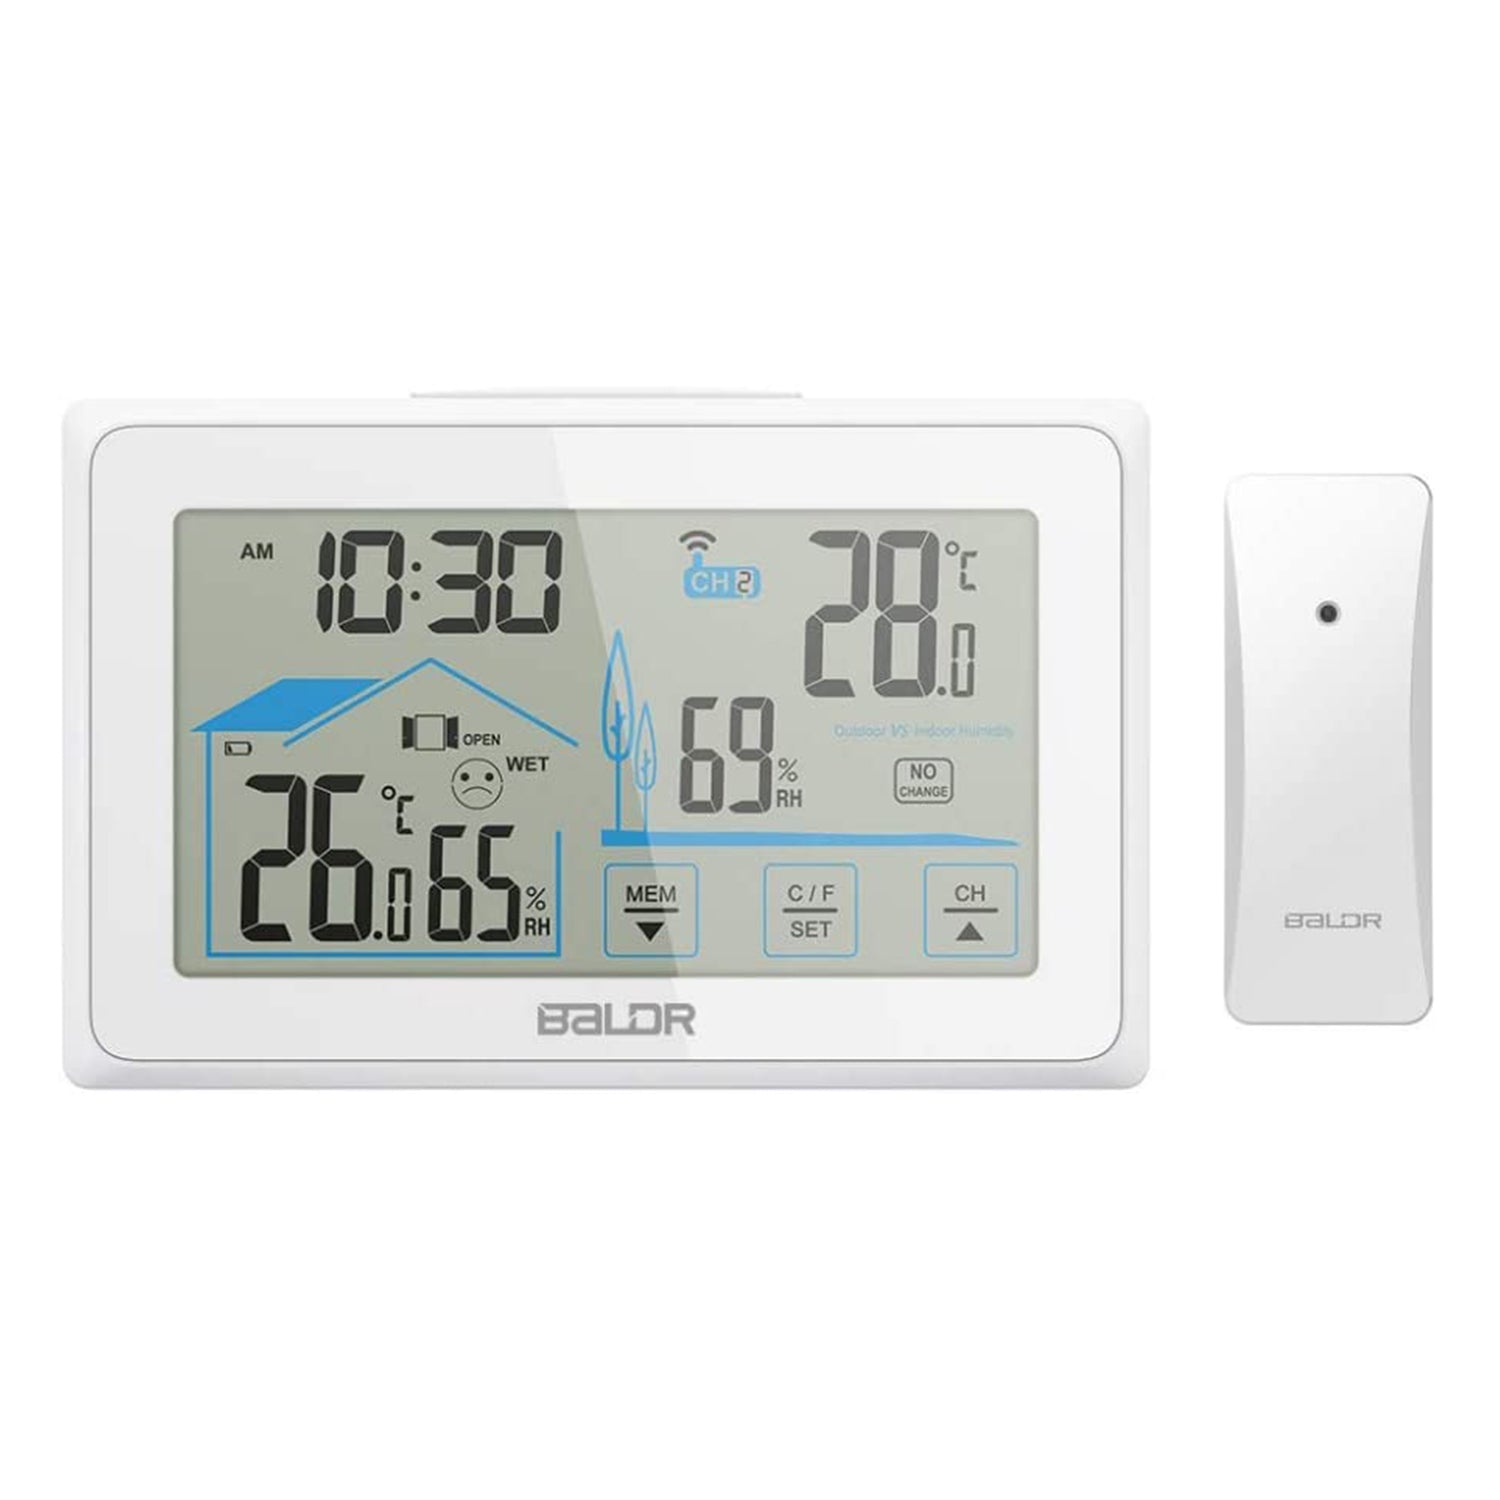 BALDR Wireless Weather Station, Digital Indoor Outdoor Thermometer  Hygrometer with Backlight LCD Display and External Sensor, Ideal for  Weather